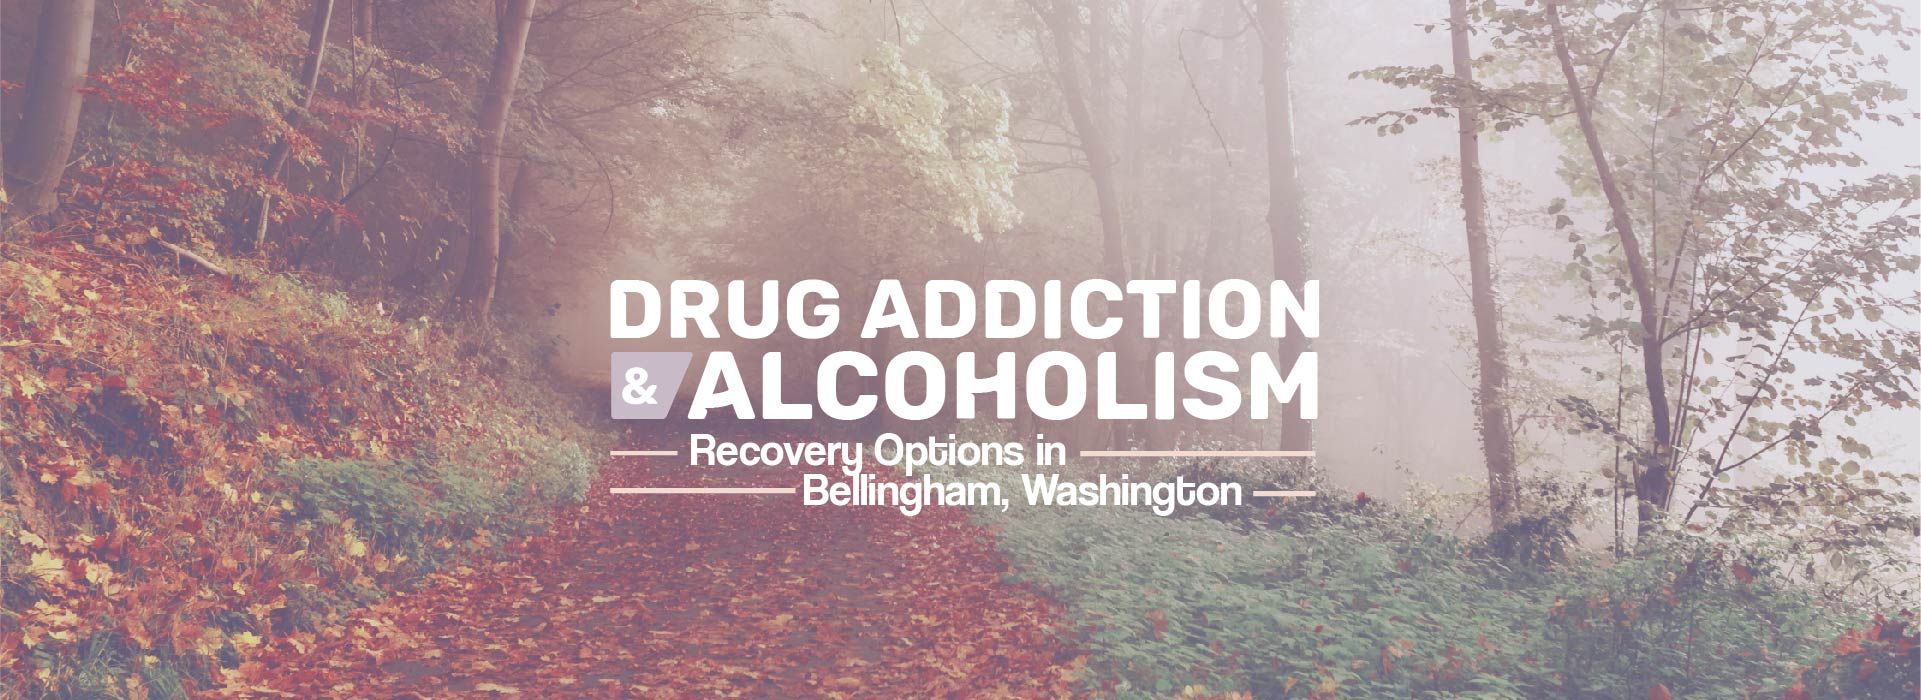 Bellingham, WA Recovery Resources